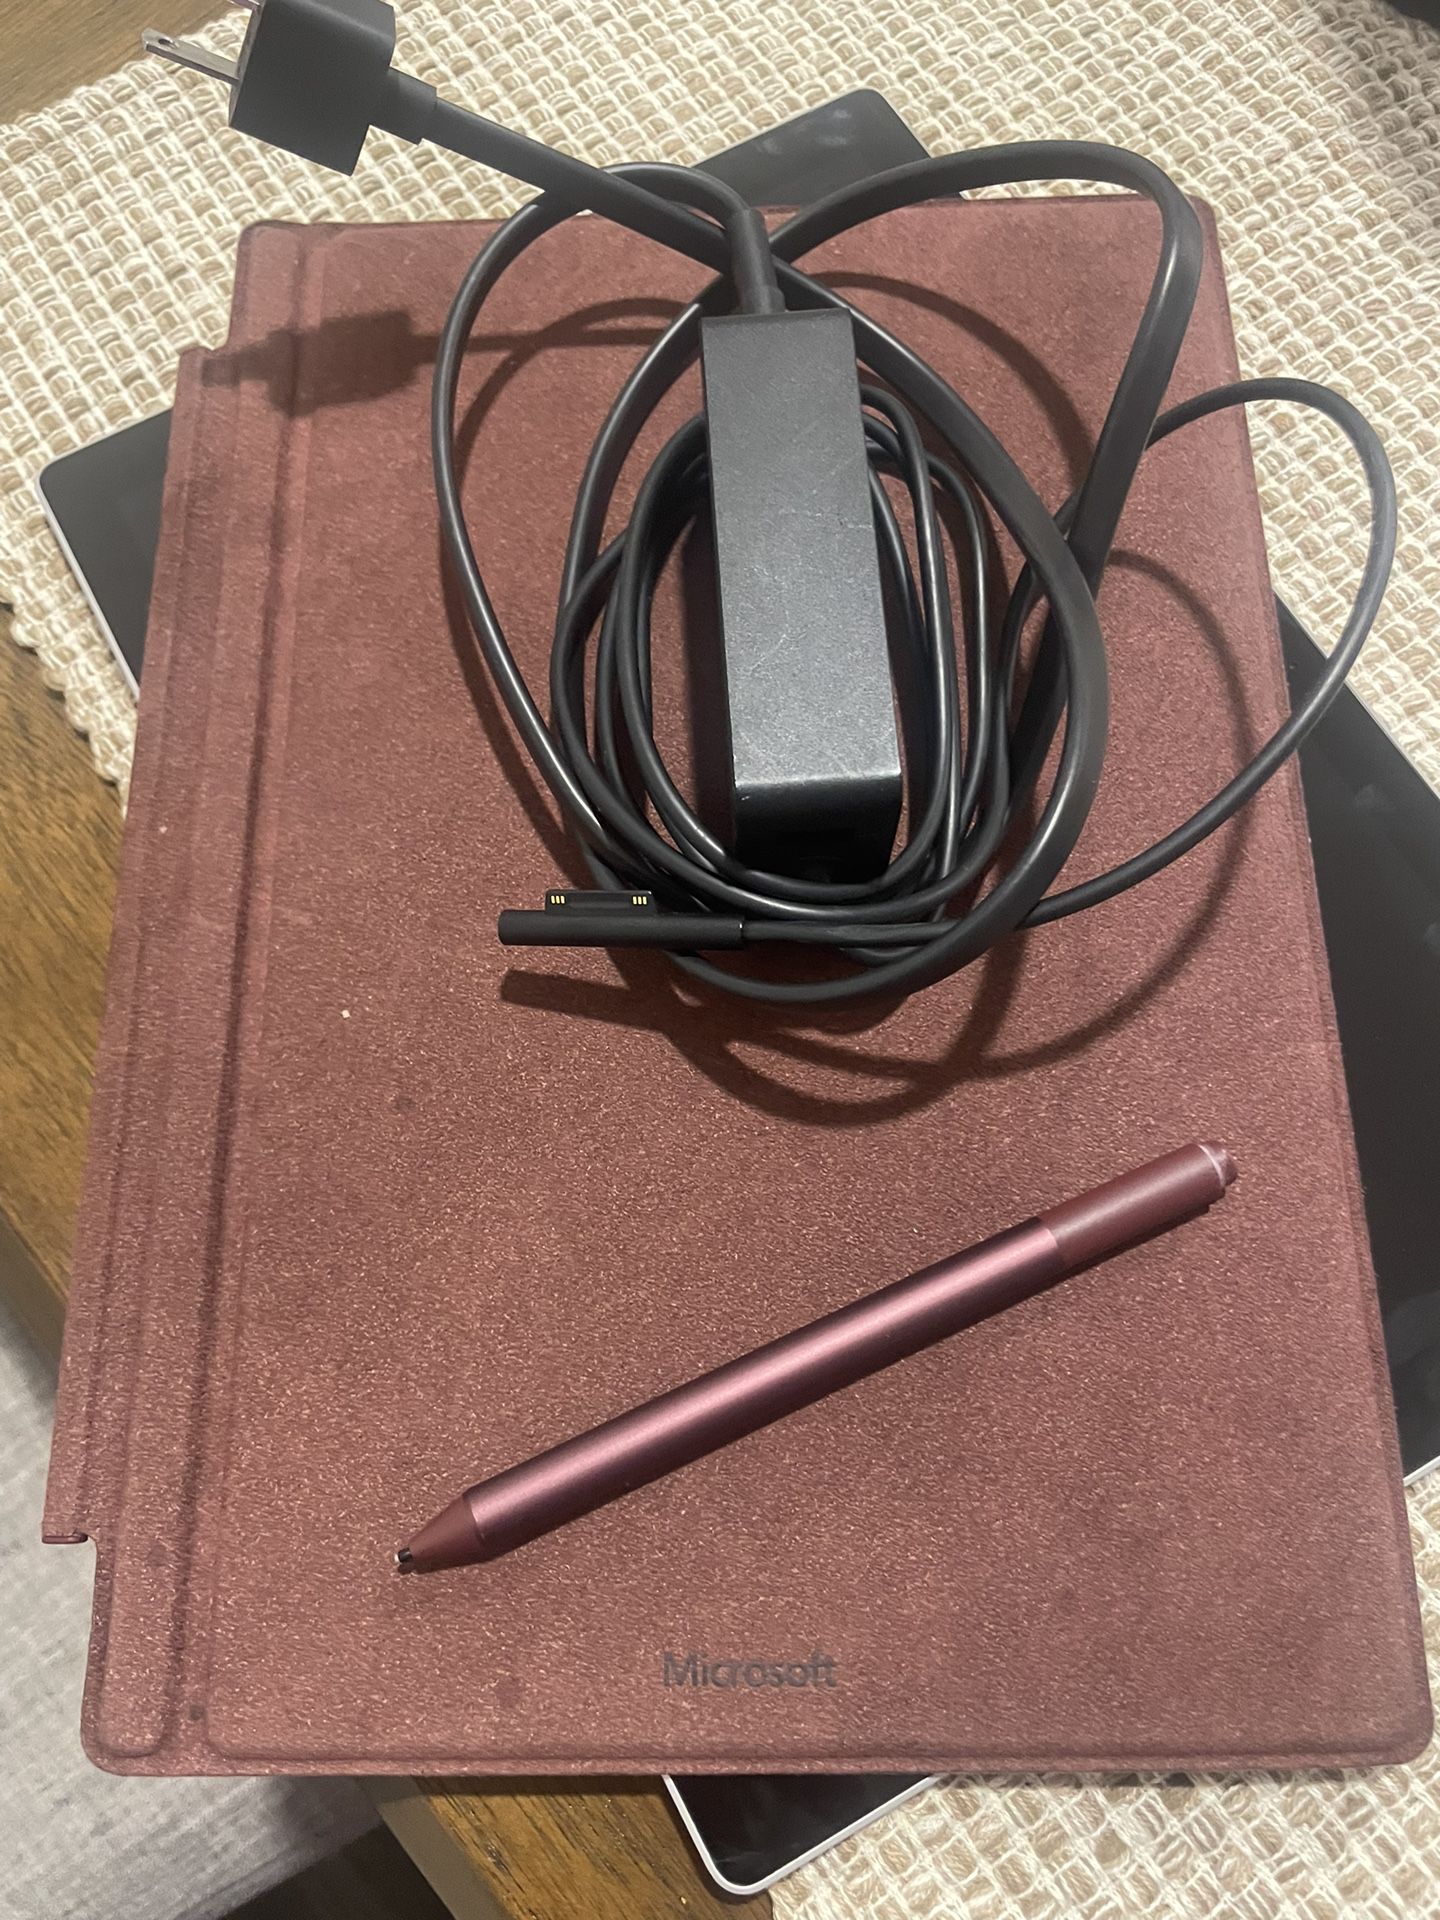 Microsoft Surface PRO keyboard, pen in burgundy, and working adapter-compatible with pro 4 &pro 5)